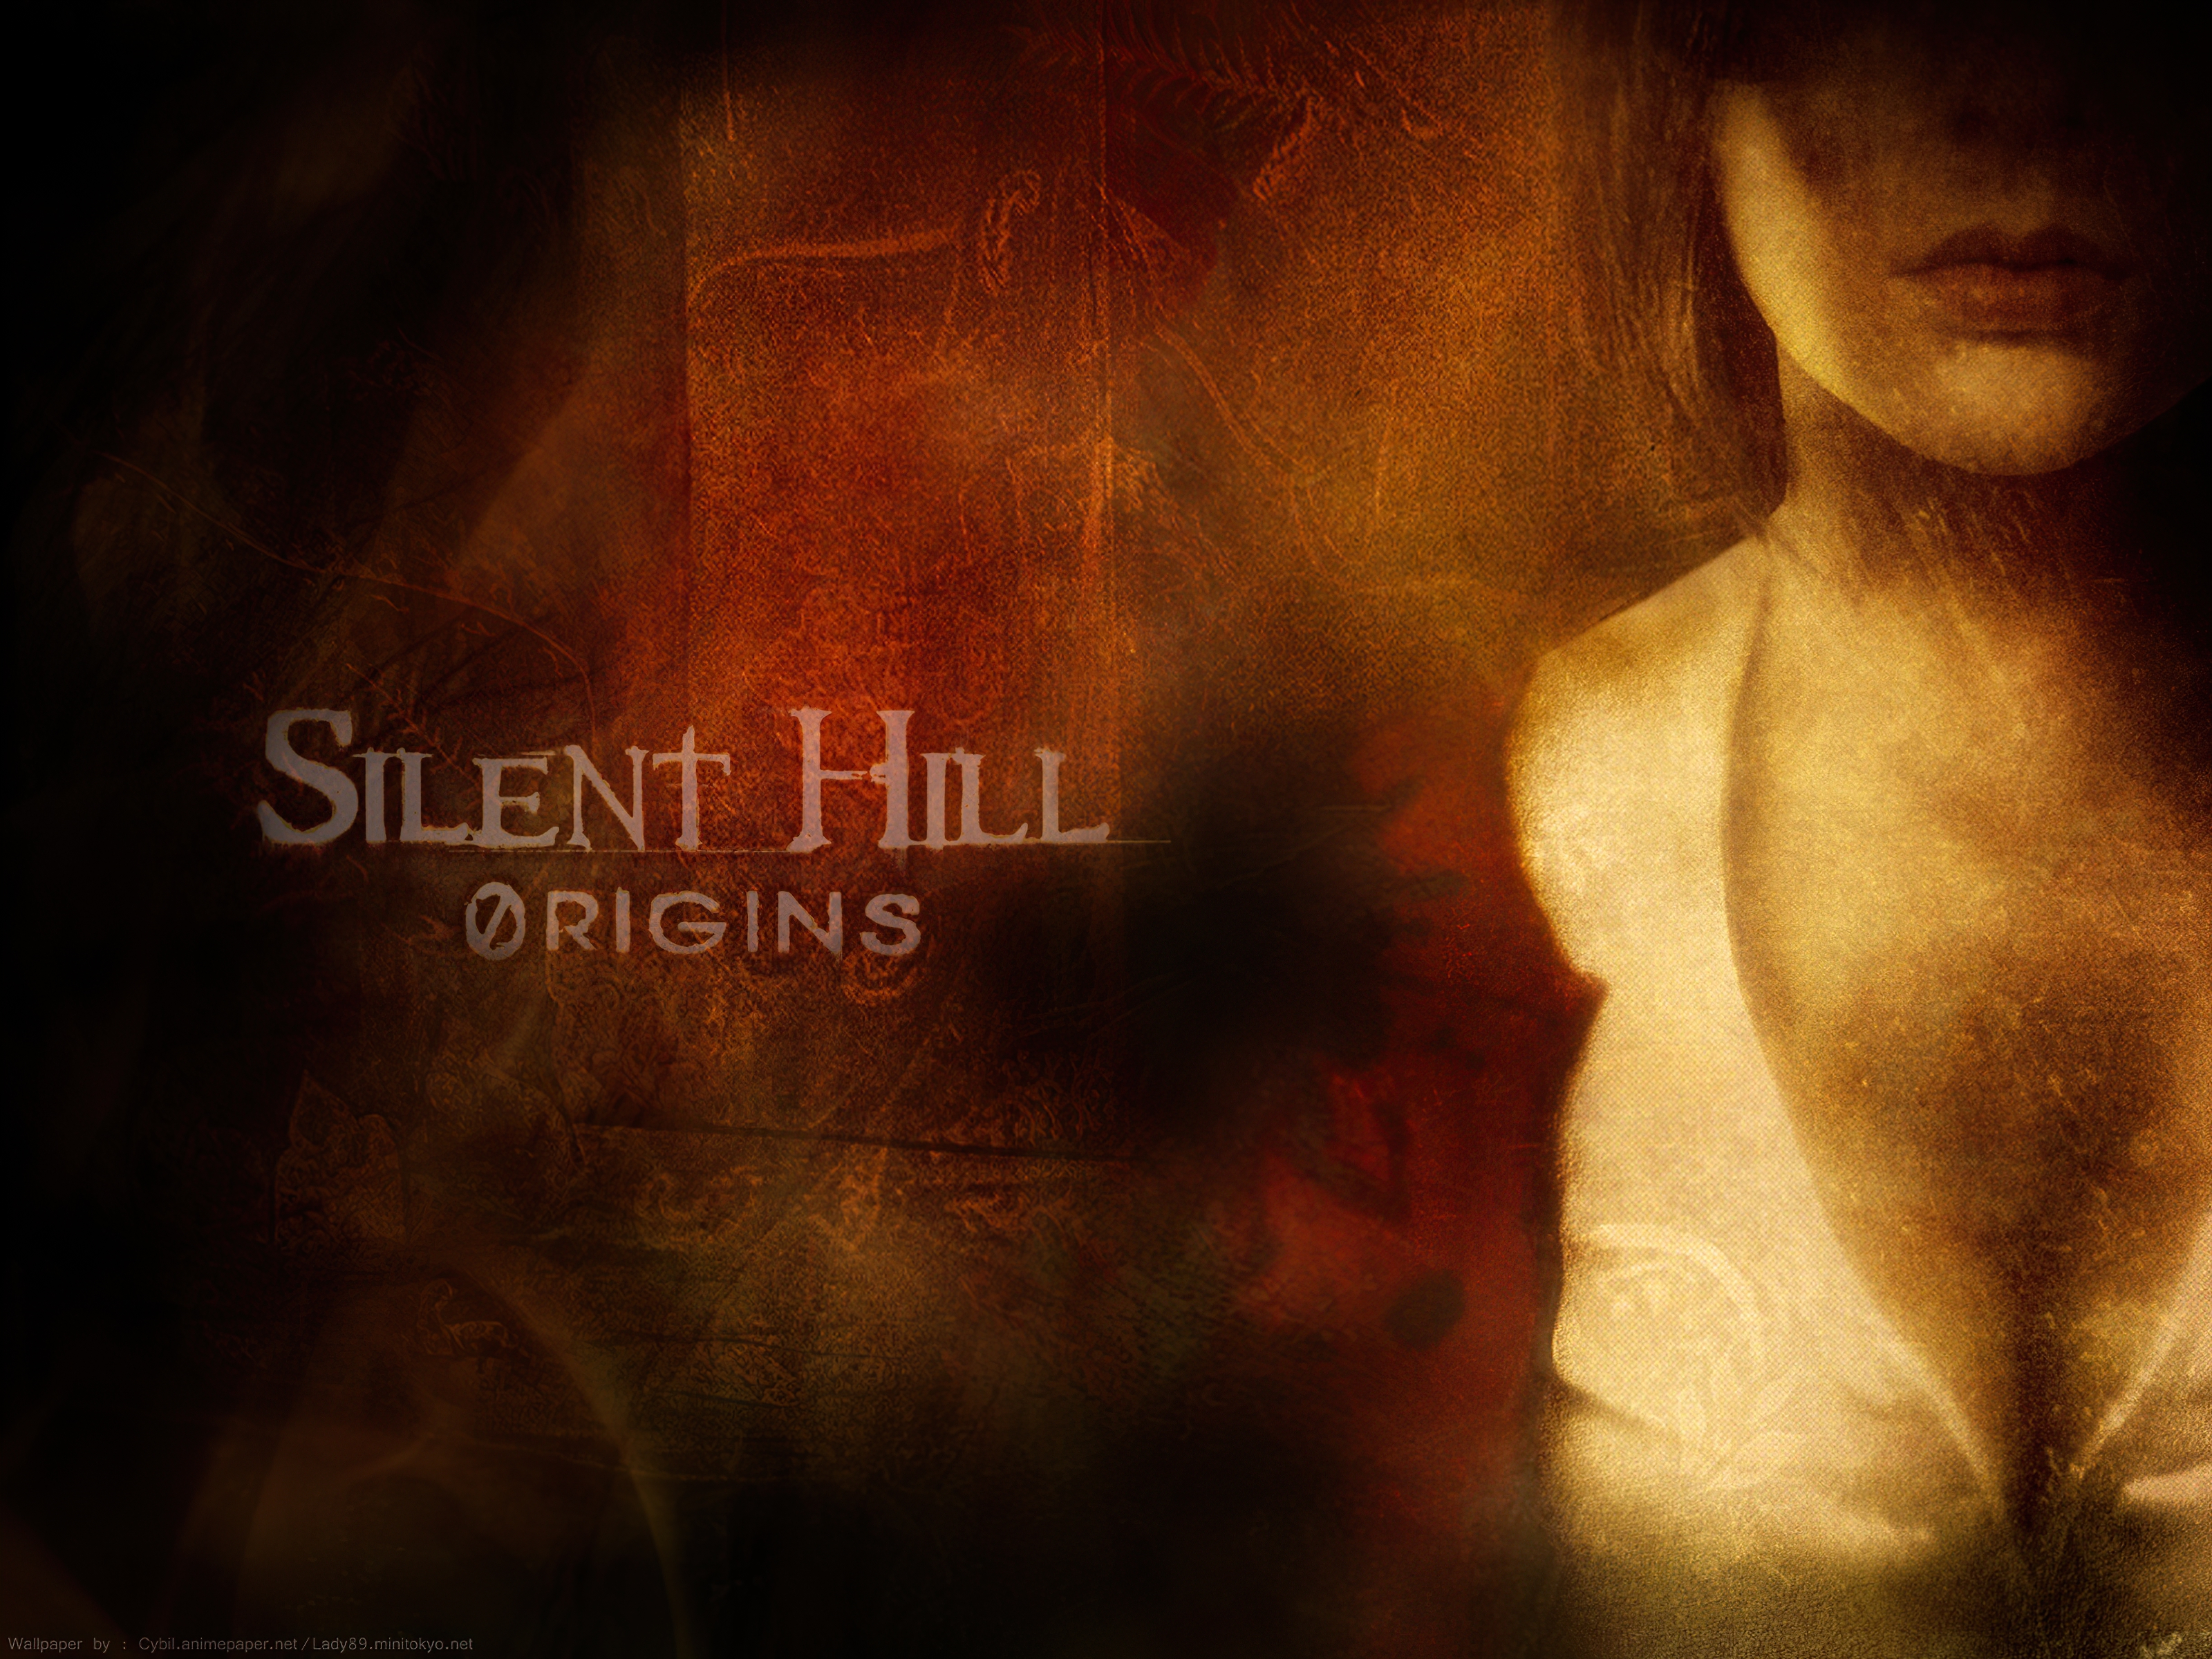 Lisa Garland - a haunting character from Silent Hill Origins, a renowned video game franchise.